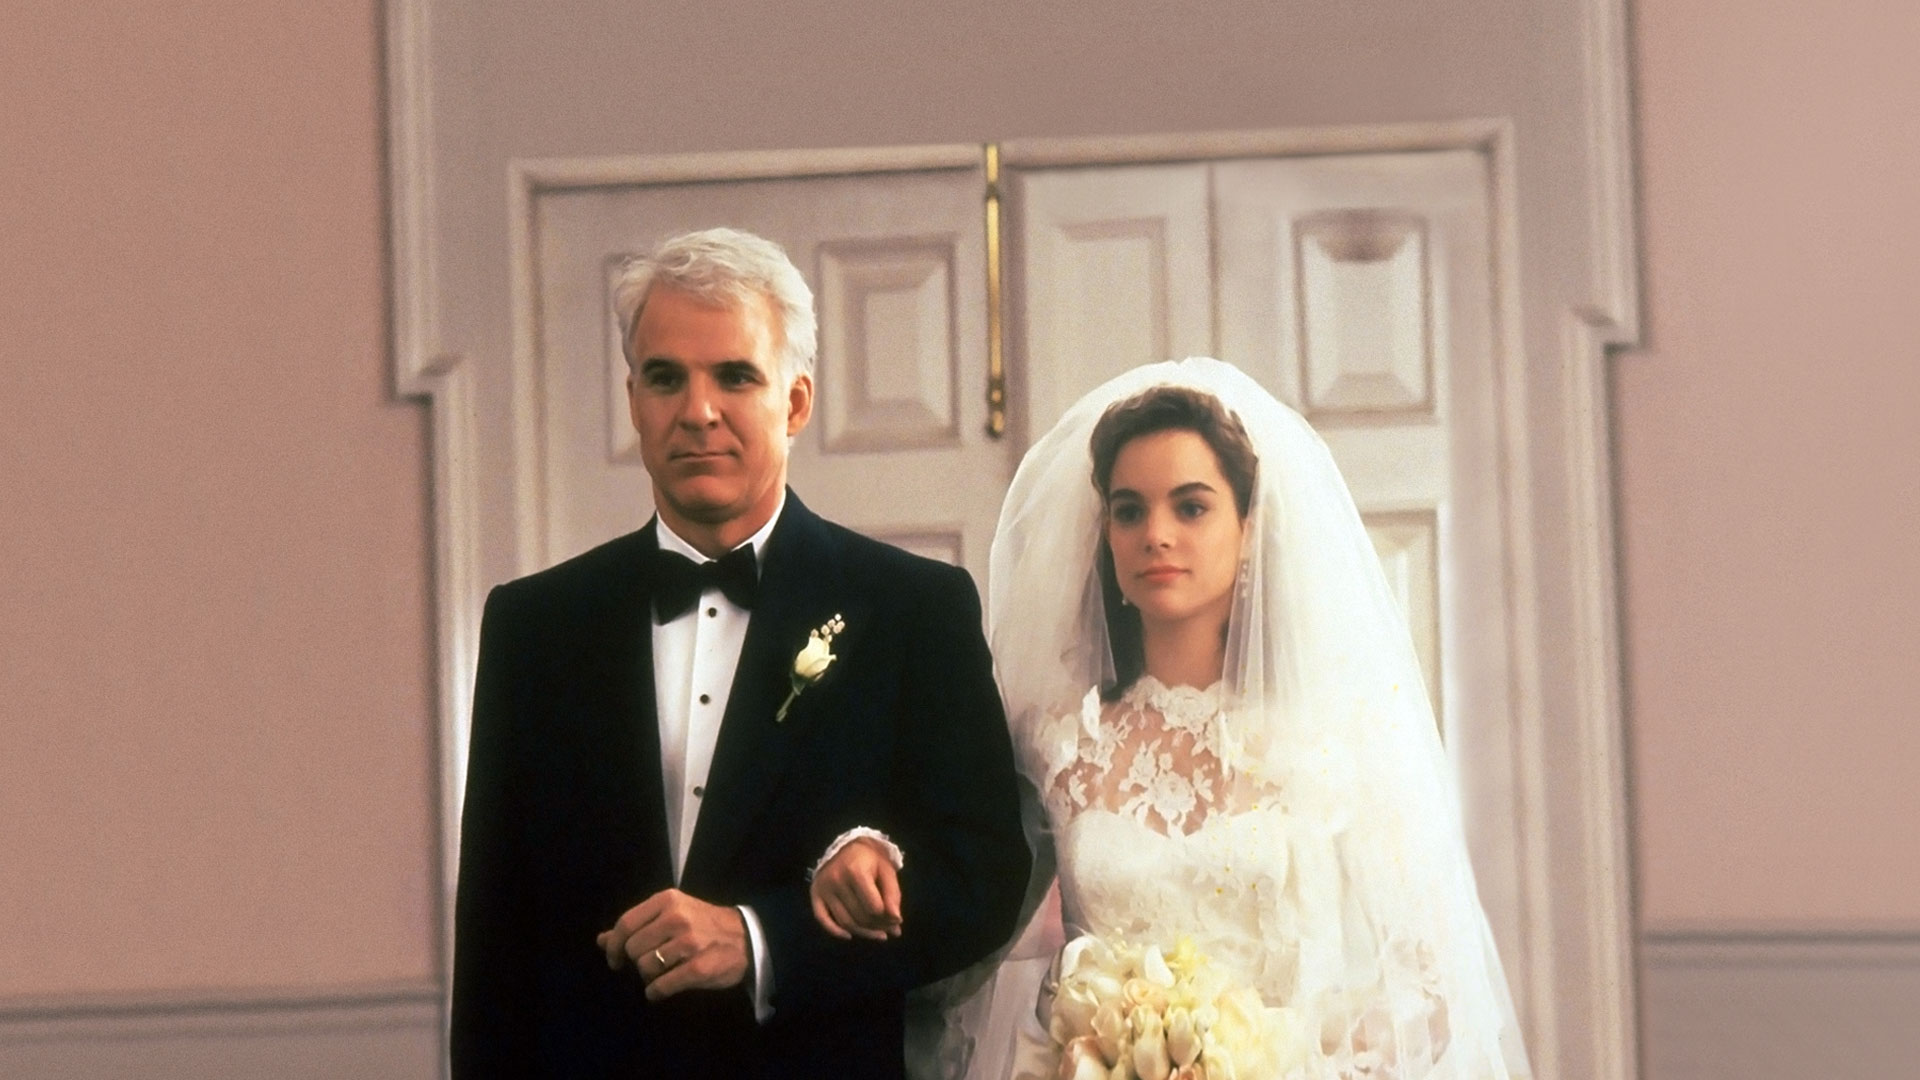 Father of the Bride - Disney+